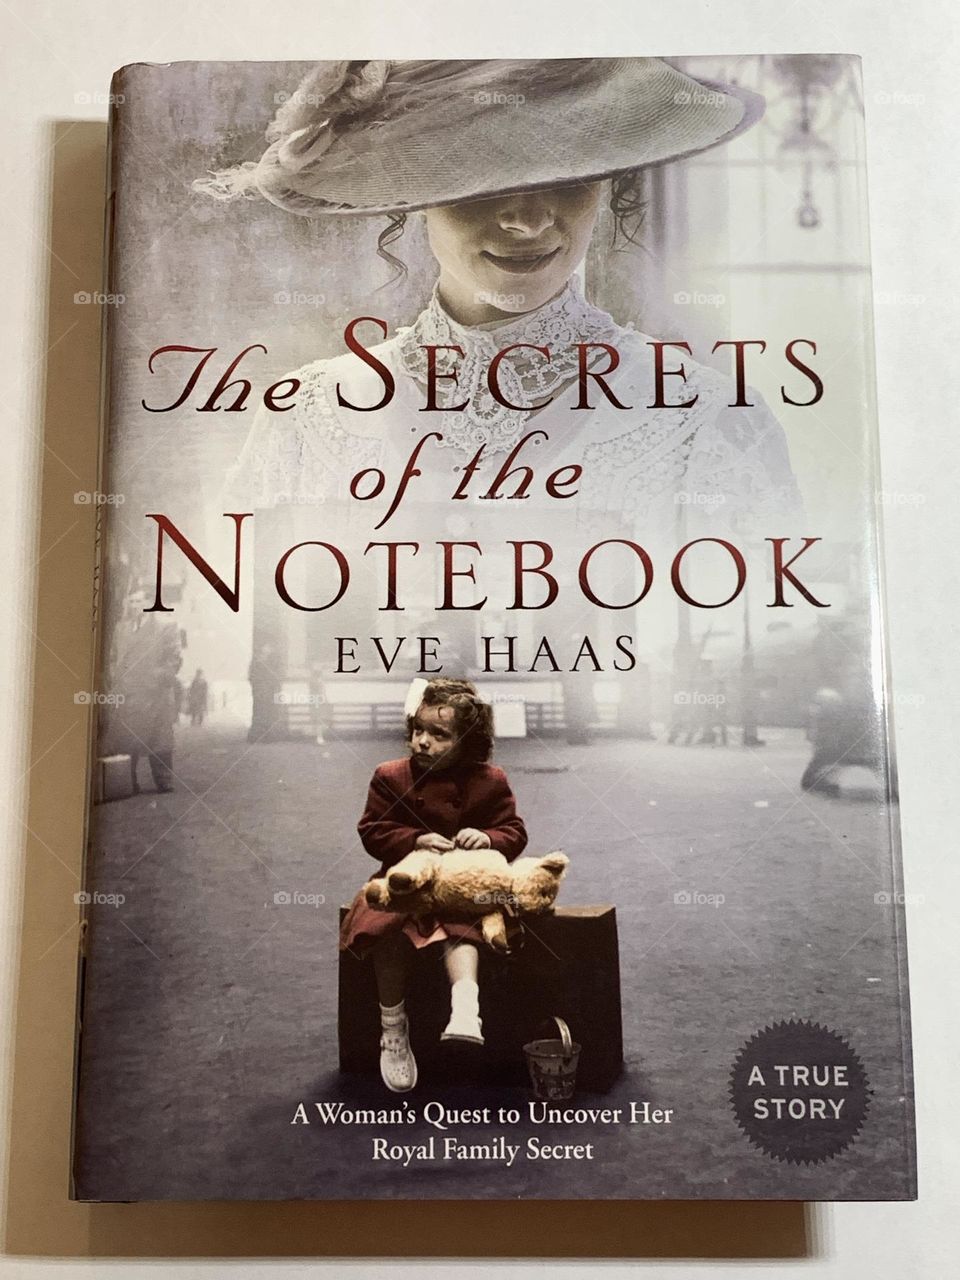 The secret of the notebook Eve Haas